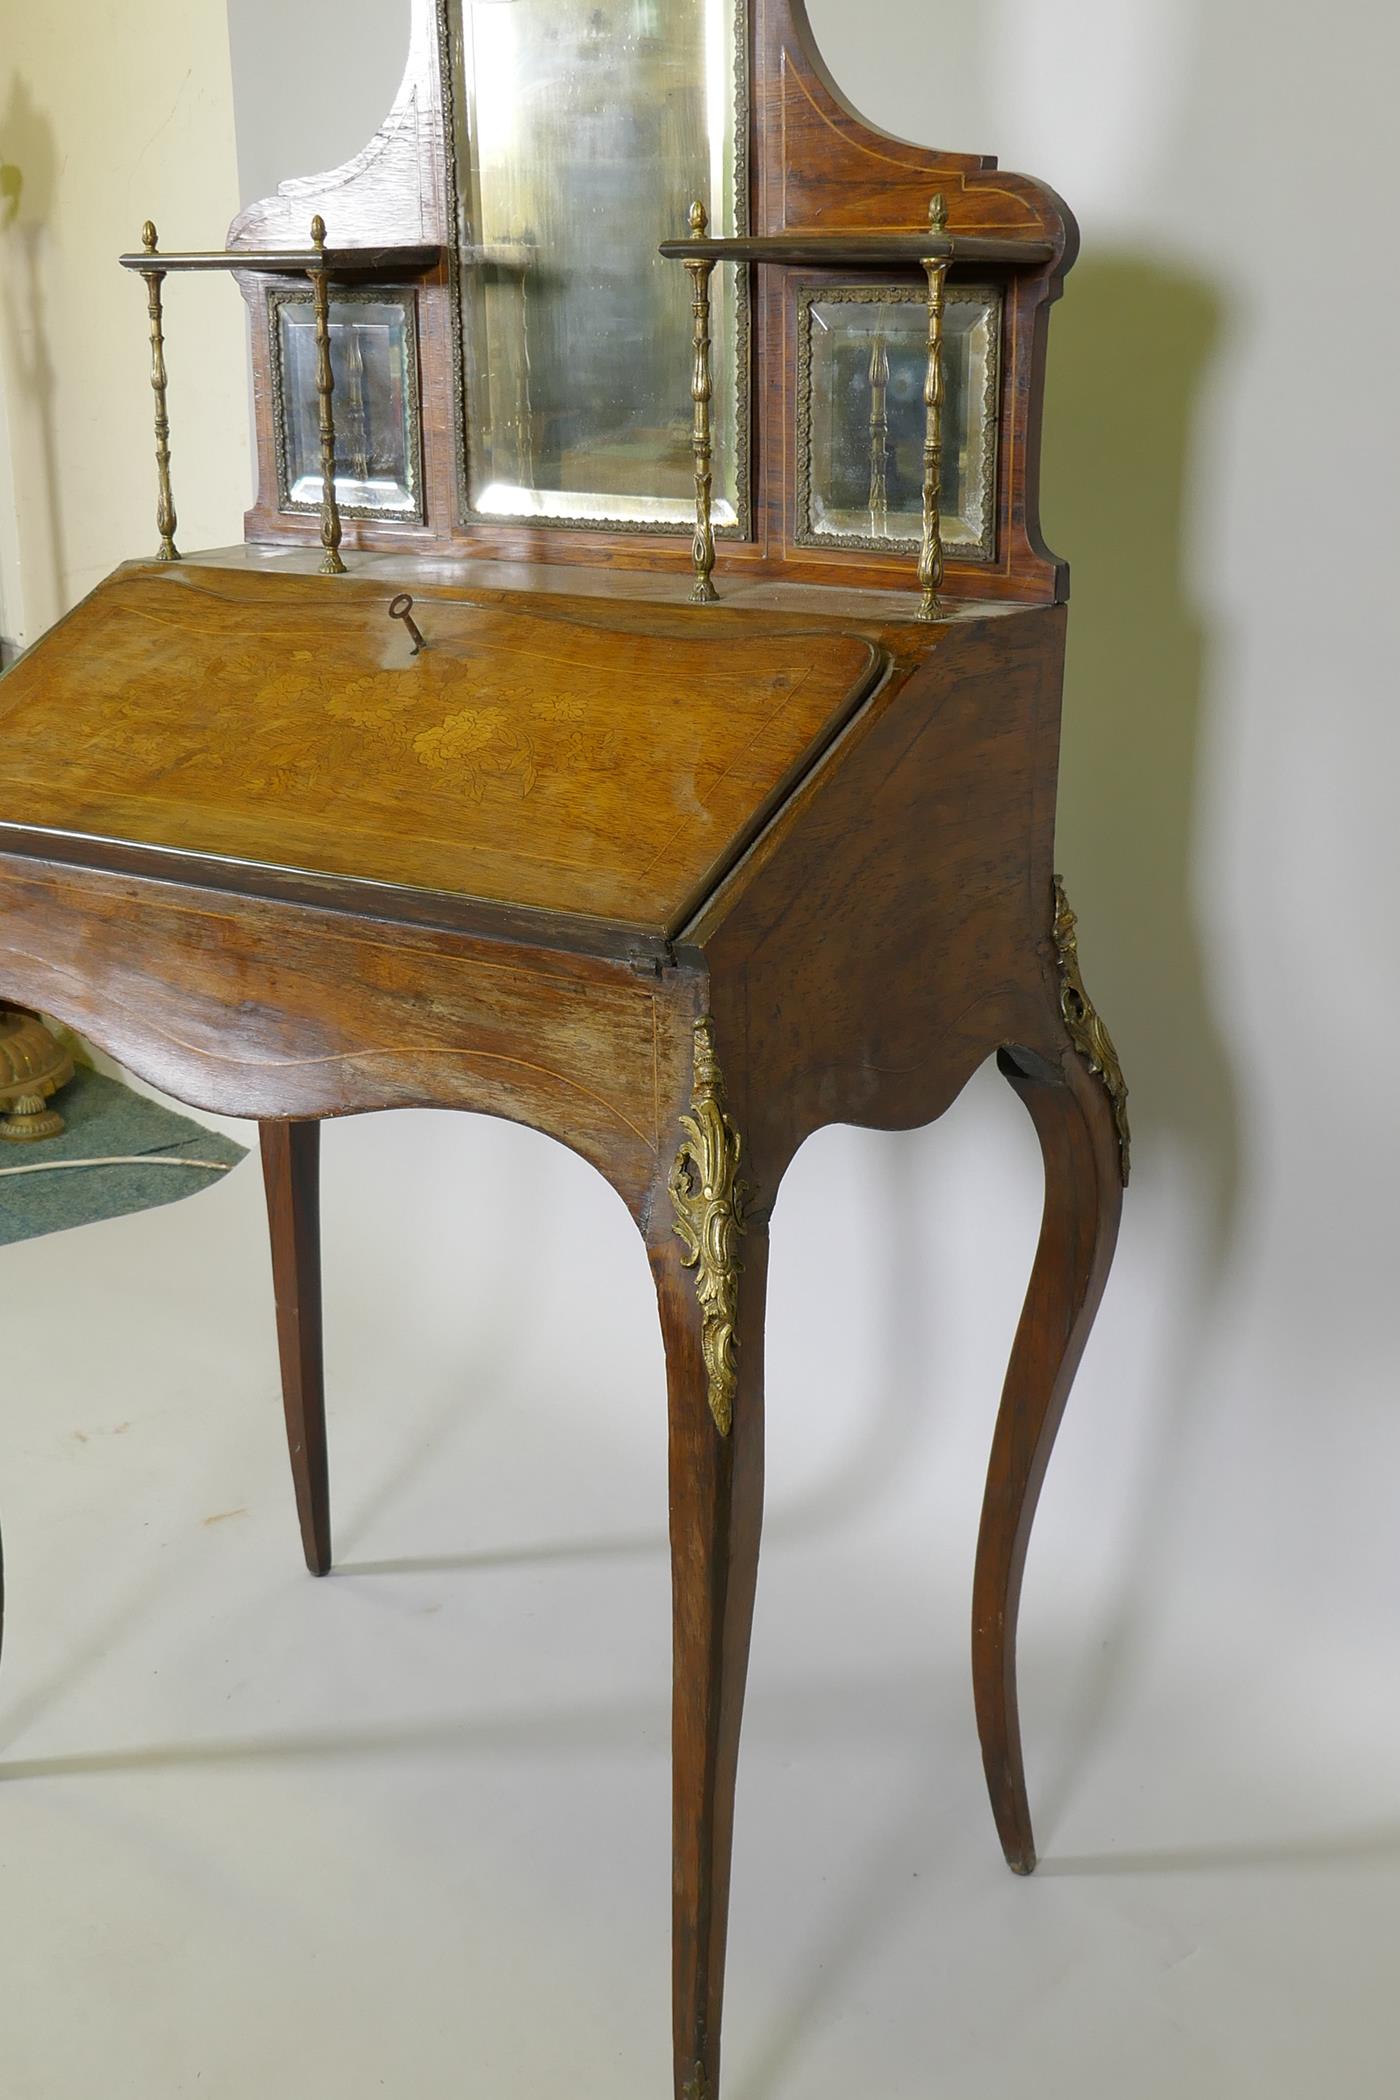 A C19th inlaid rosewood bureau de dame, with ormolu mounts, fall front and fitted interior, 31" x - Image 7 of 8